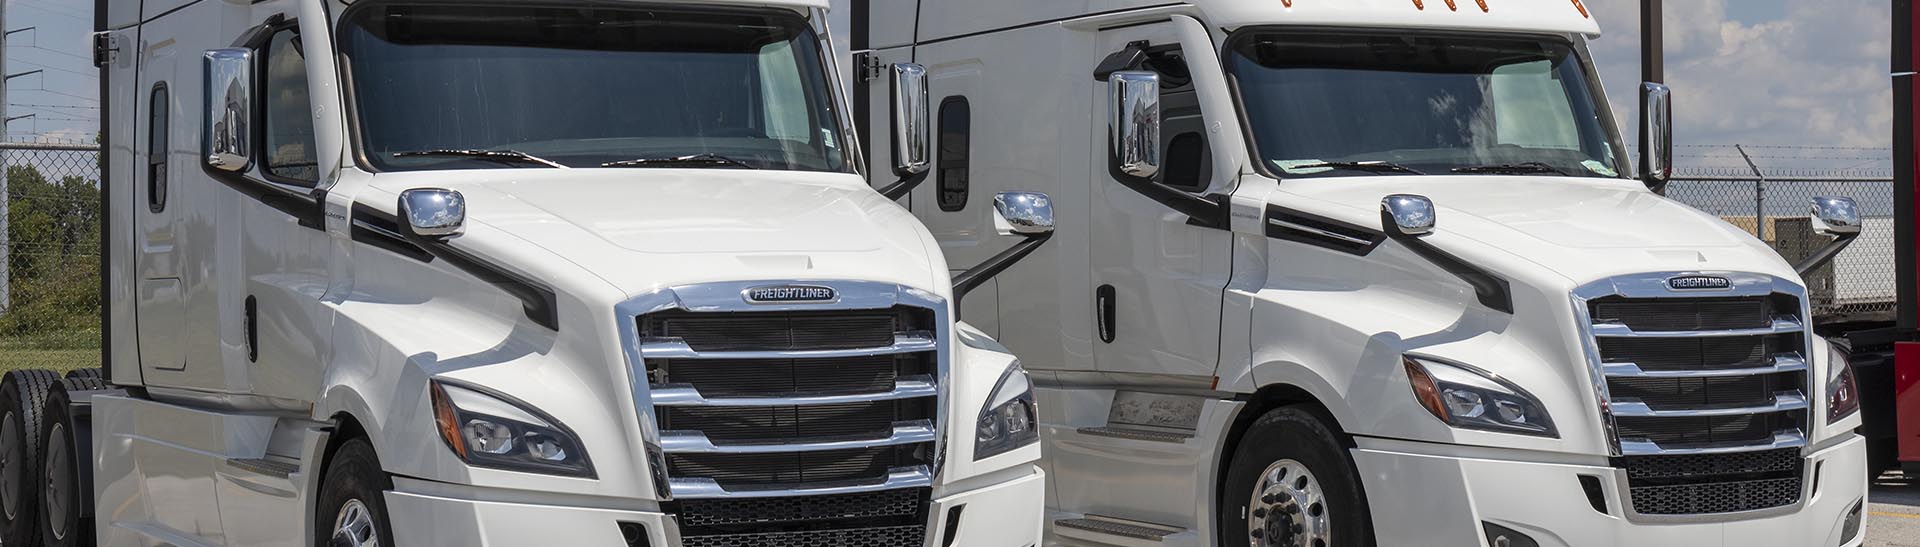 Toronto Trucking Services, Logistics Services and Long Haul Trucking